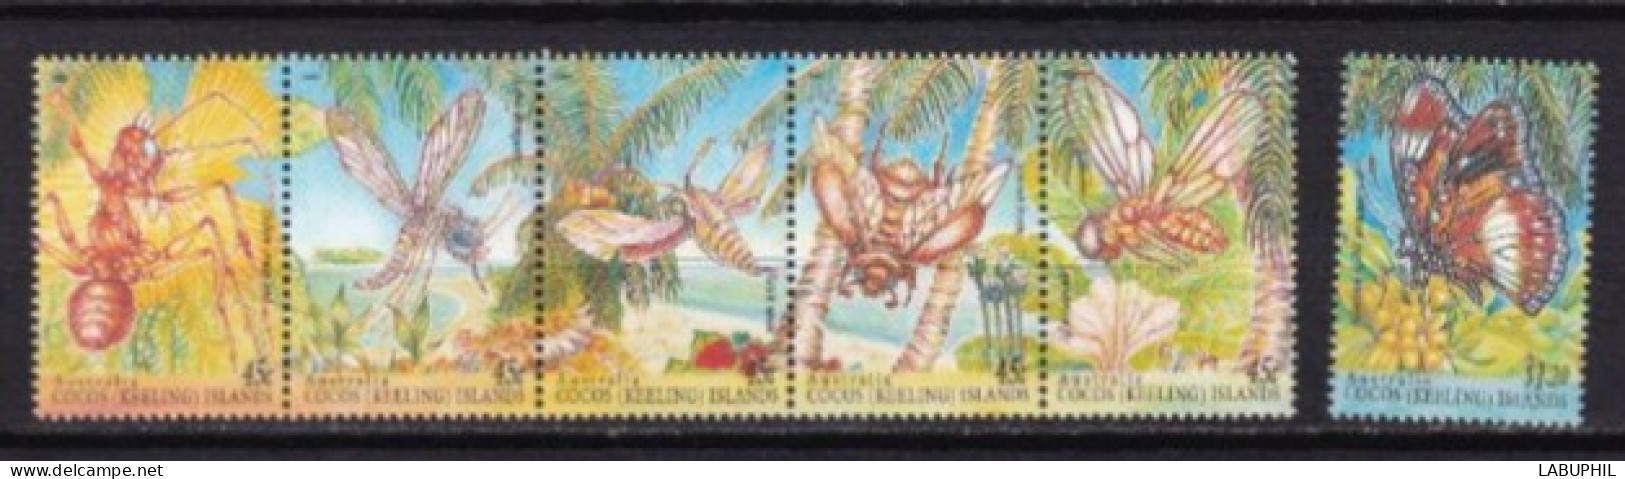 COCOS MNH **  1995 Faune Insectes - Cocos (Keeling) Islands